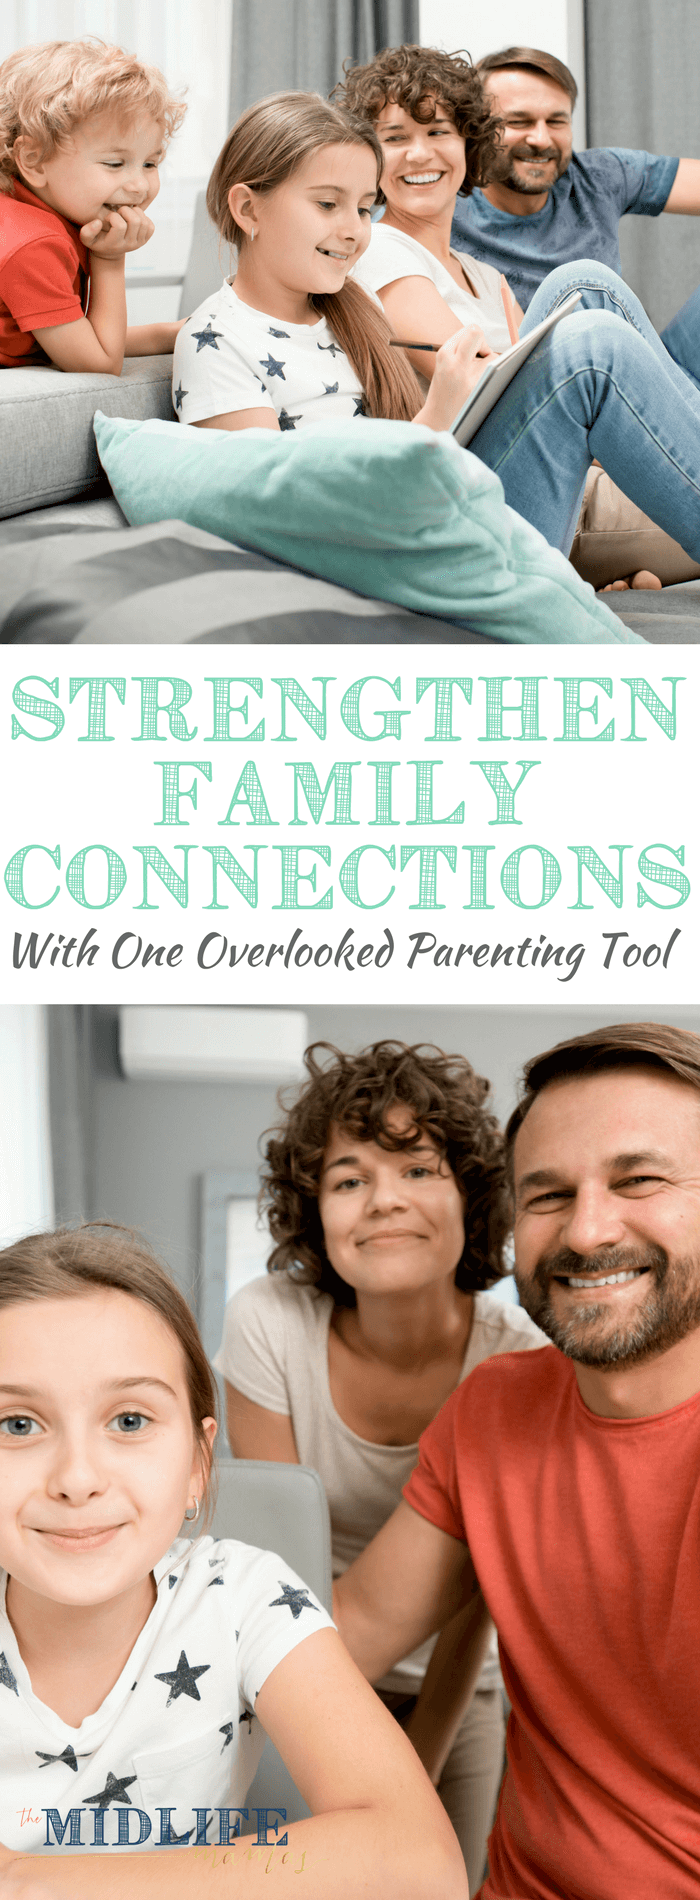 As our children grow up, it gets harder to find ideas and activities to foster strong family connections. But this idea for a family meeting that parents can use to build a strong family connection that lasts and lasts! #familyconnection #familymeeting www.themidlifemamas.com